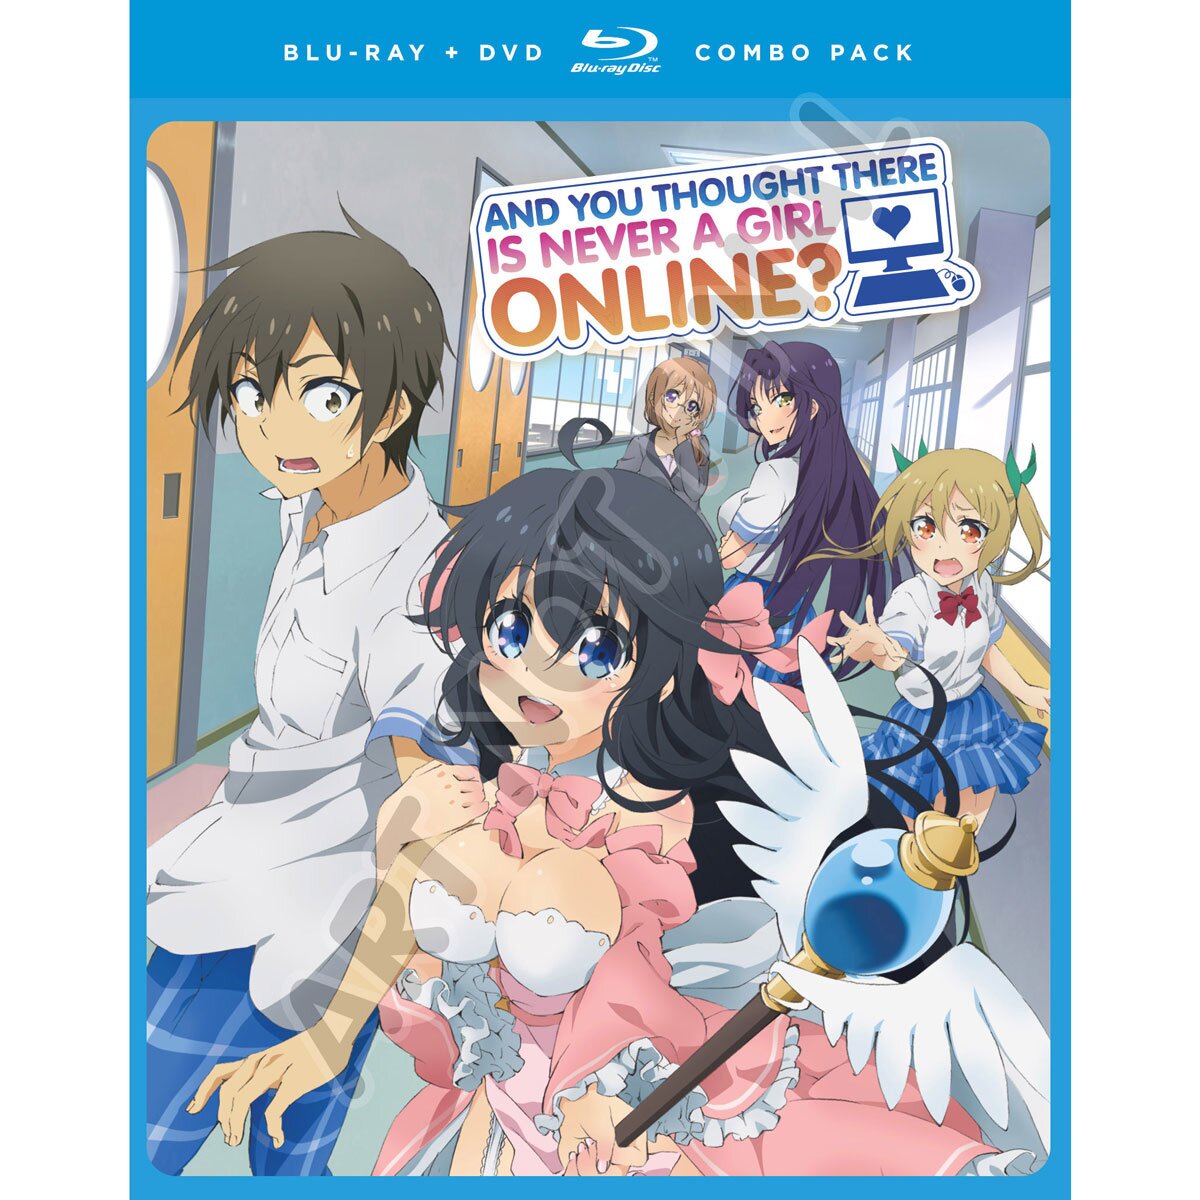 In Another World With My Smartphone: The Complete Series (Blu-ray) 